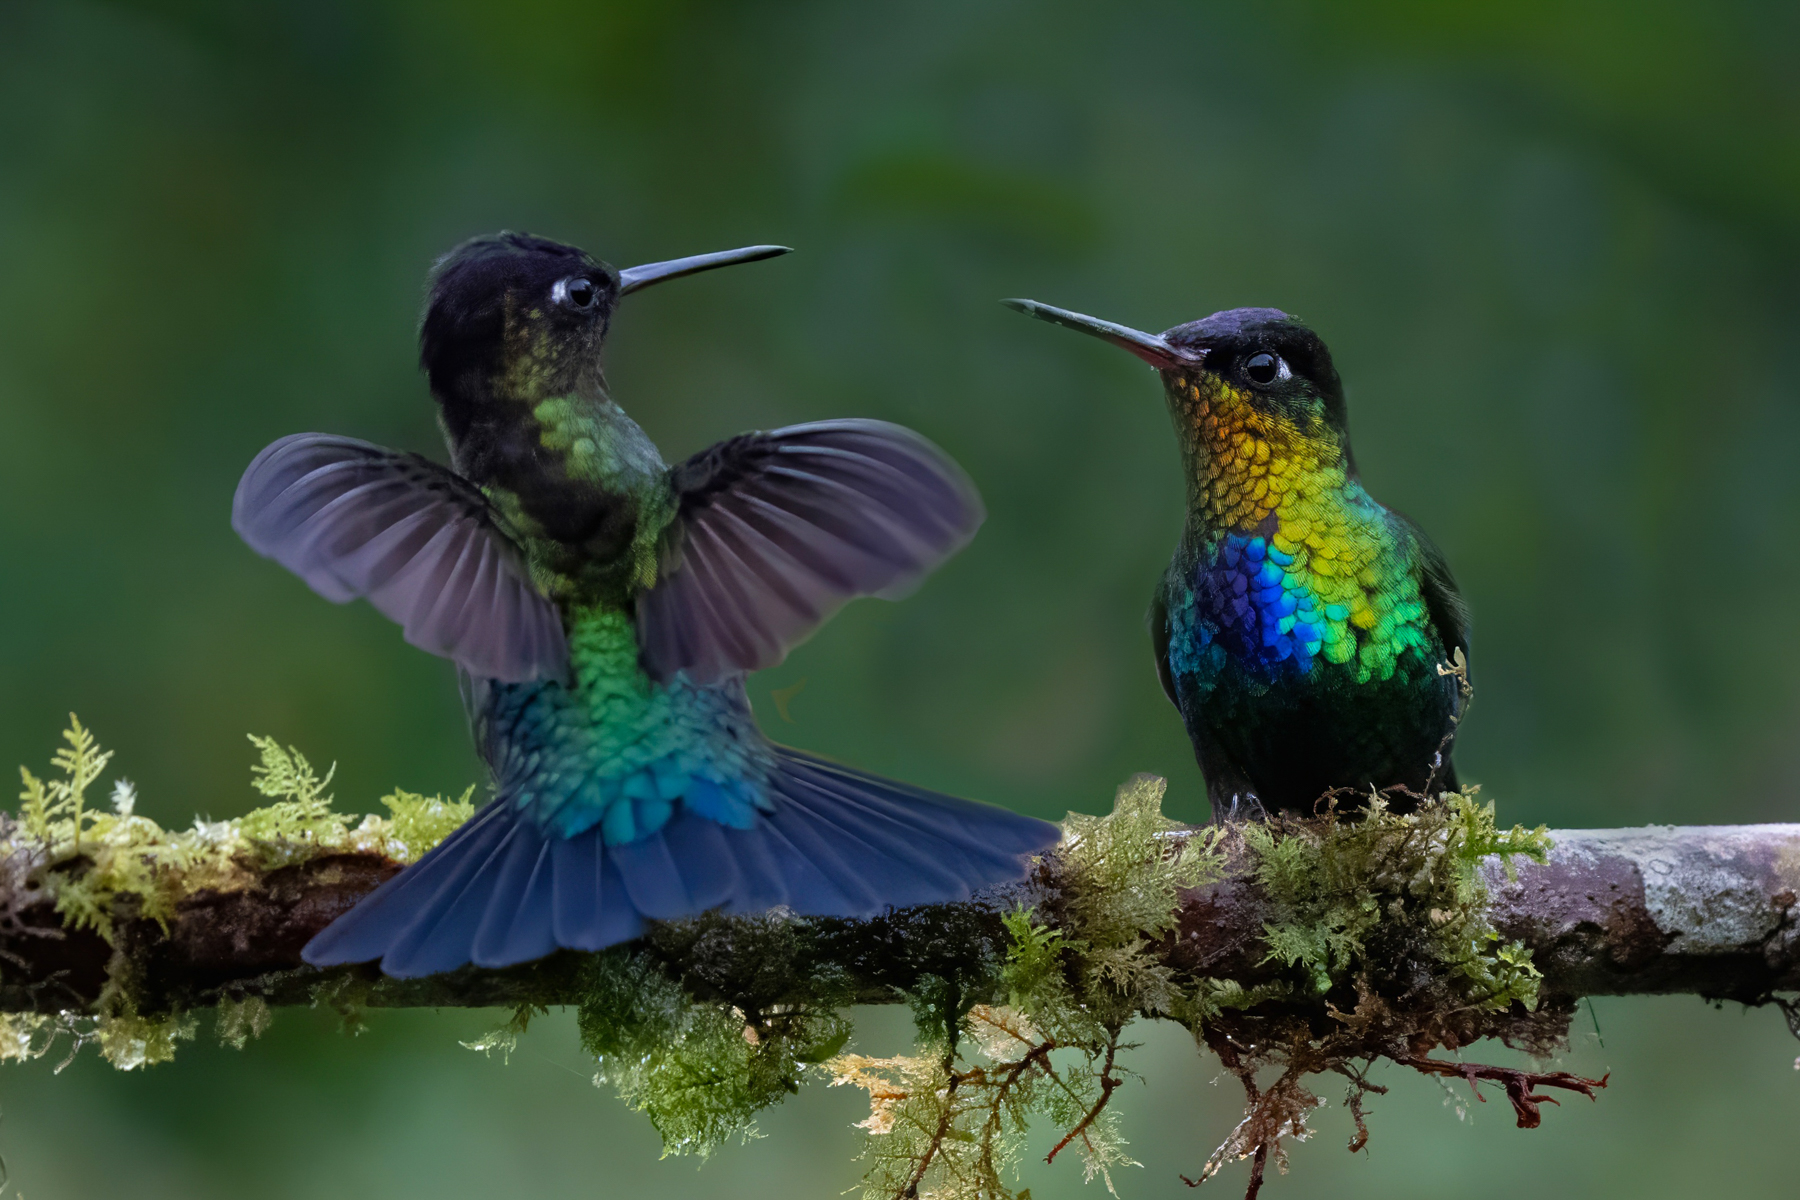 Fiery-throated Hummingbirds face off over females (image by Inger Vandyke)